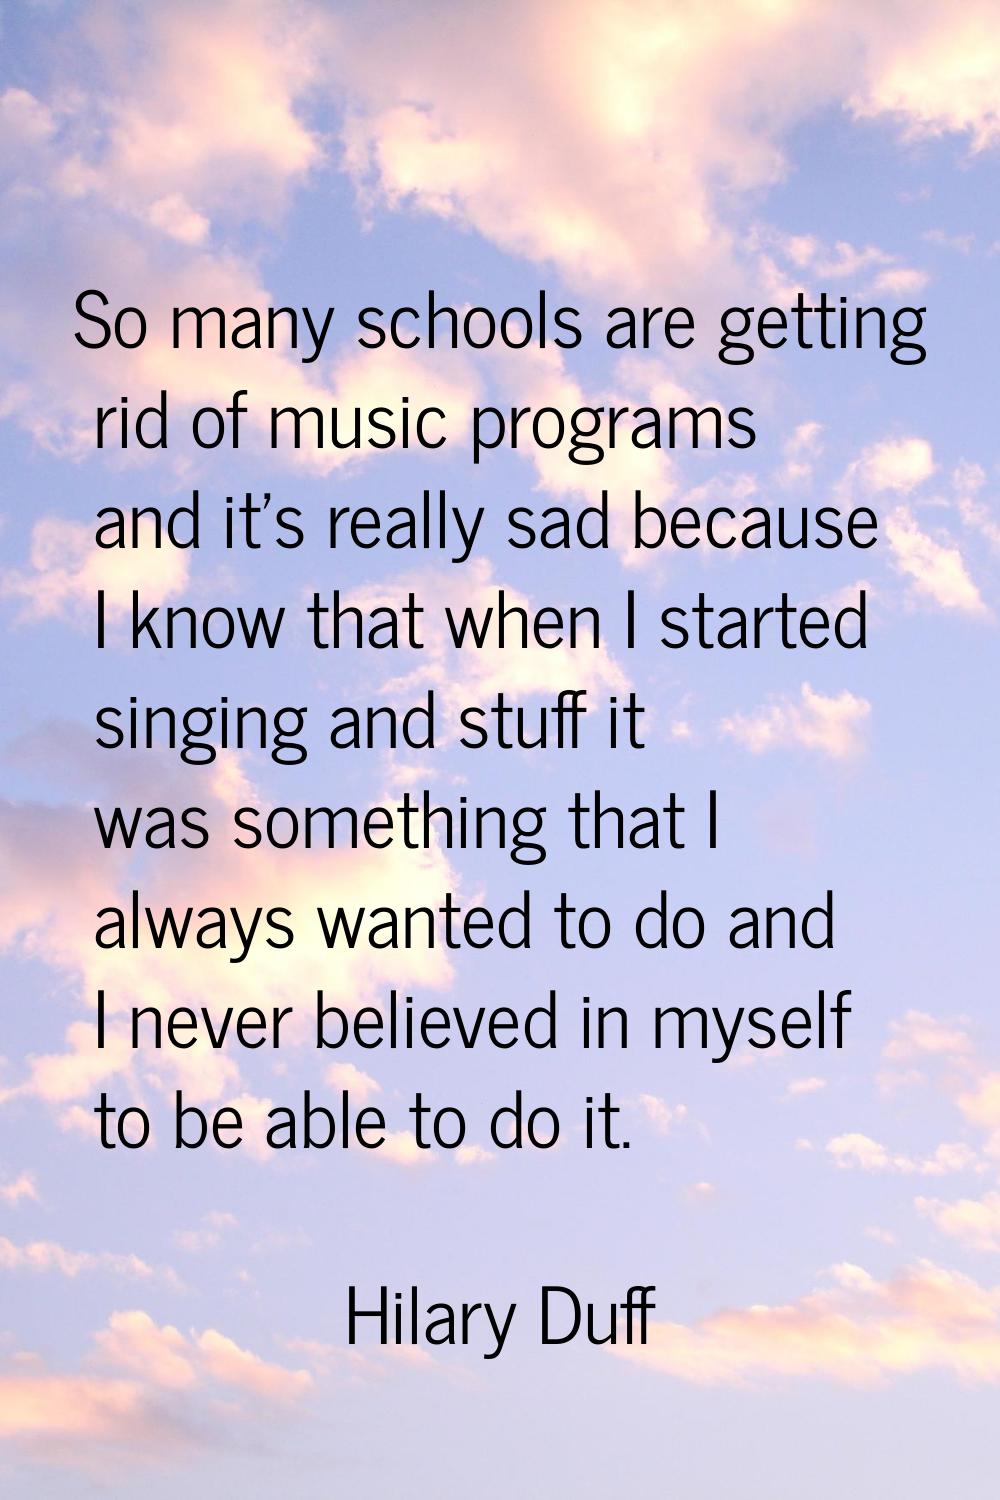 So many schools are getting rid of music programs and it's really sad because I know that when I st